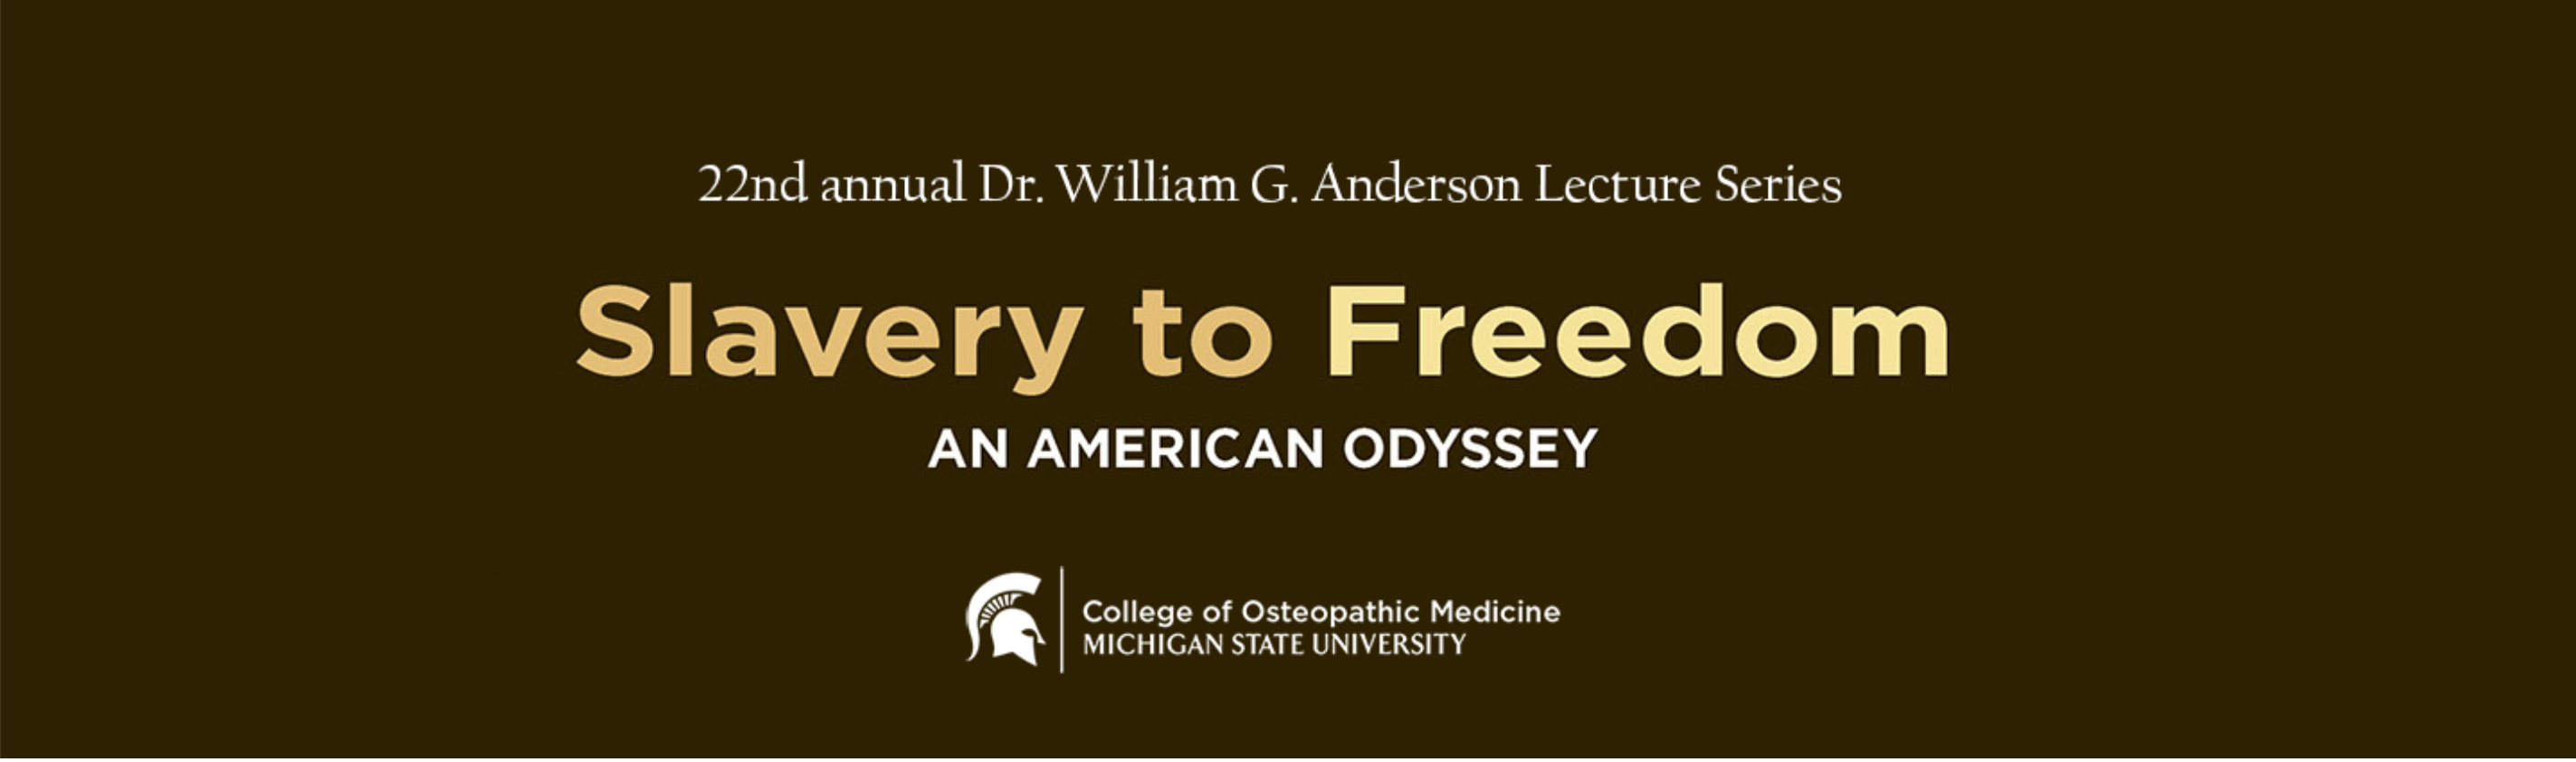 22nd Annual Slavery to Freedom series